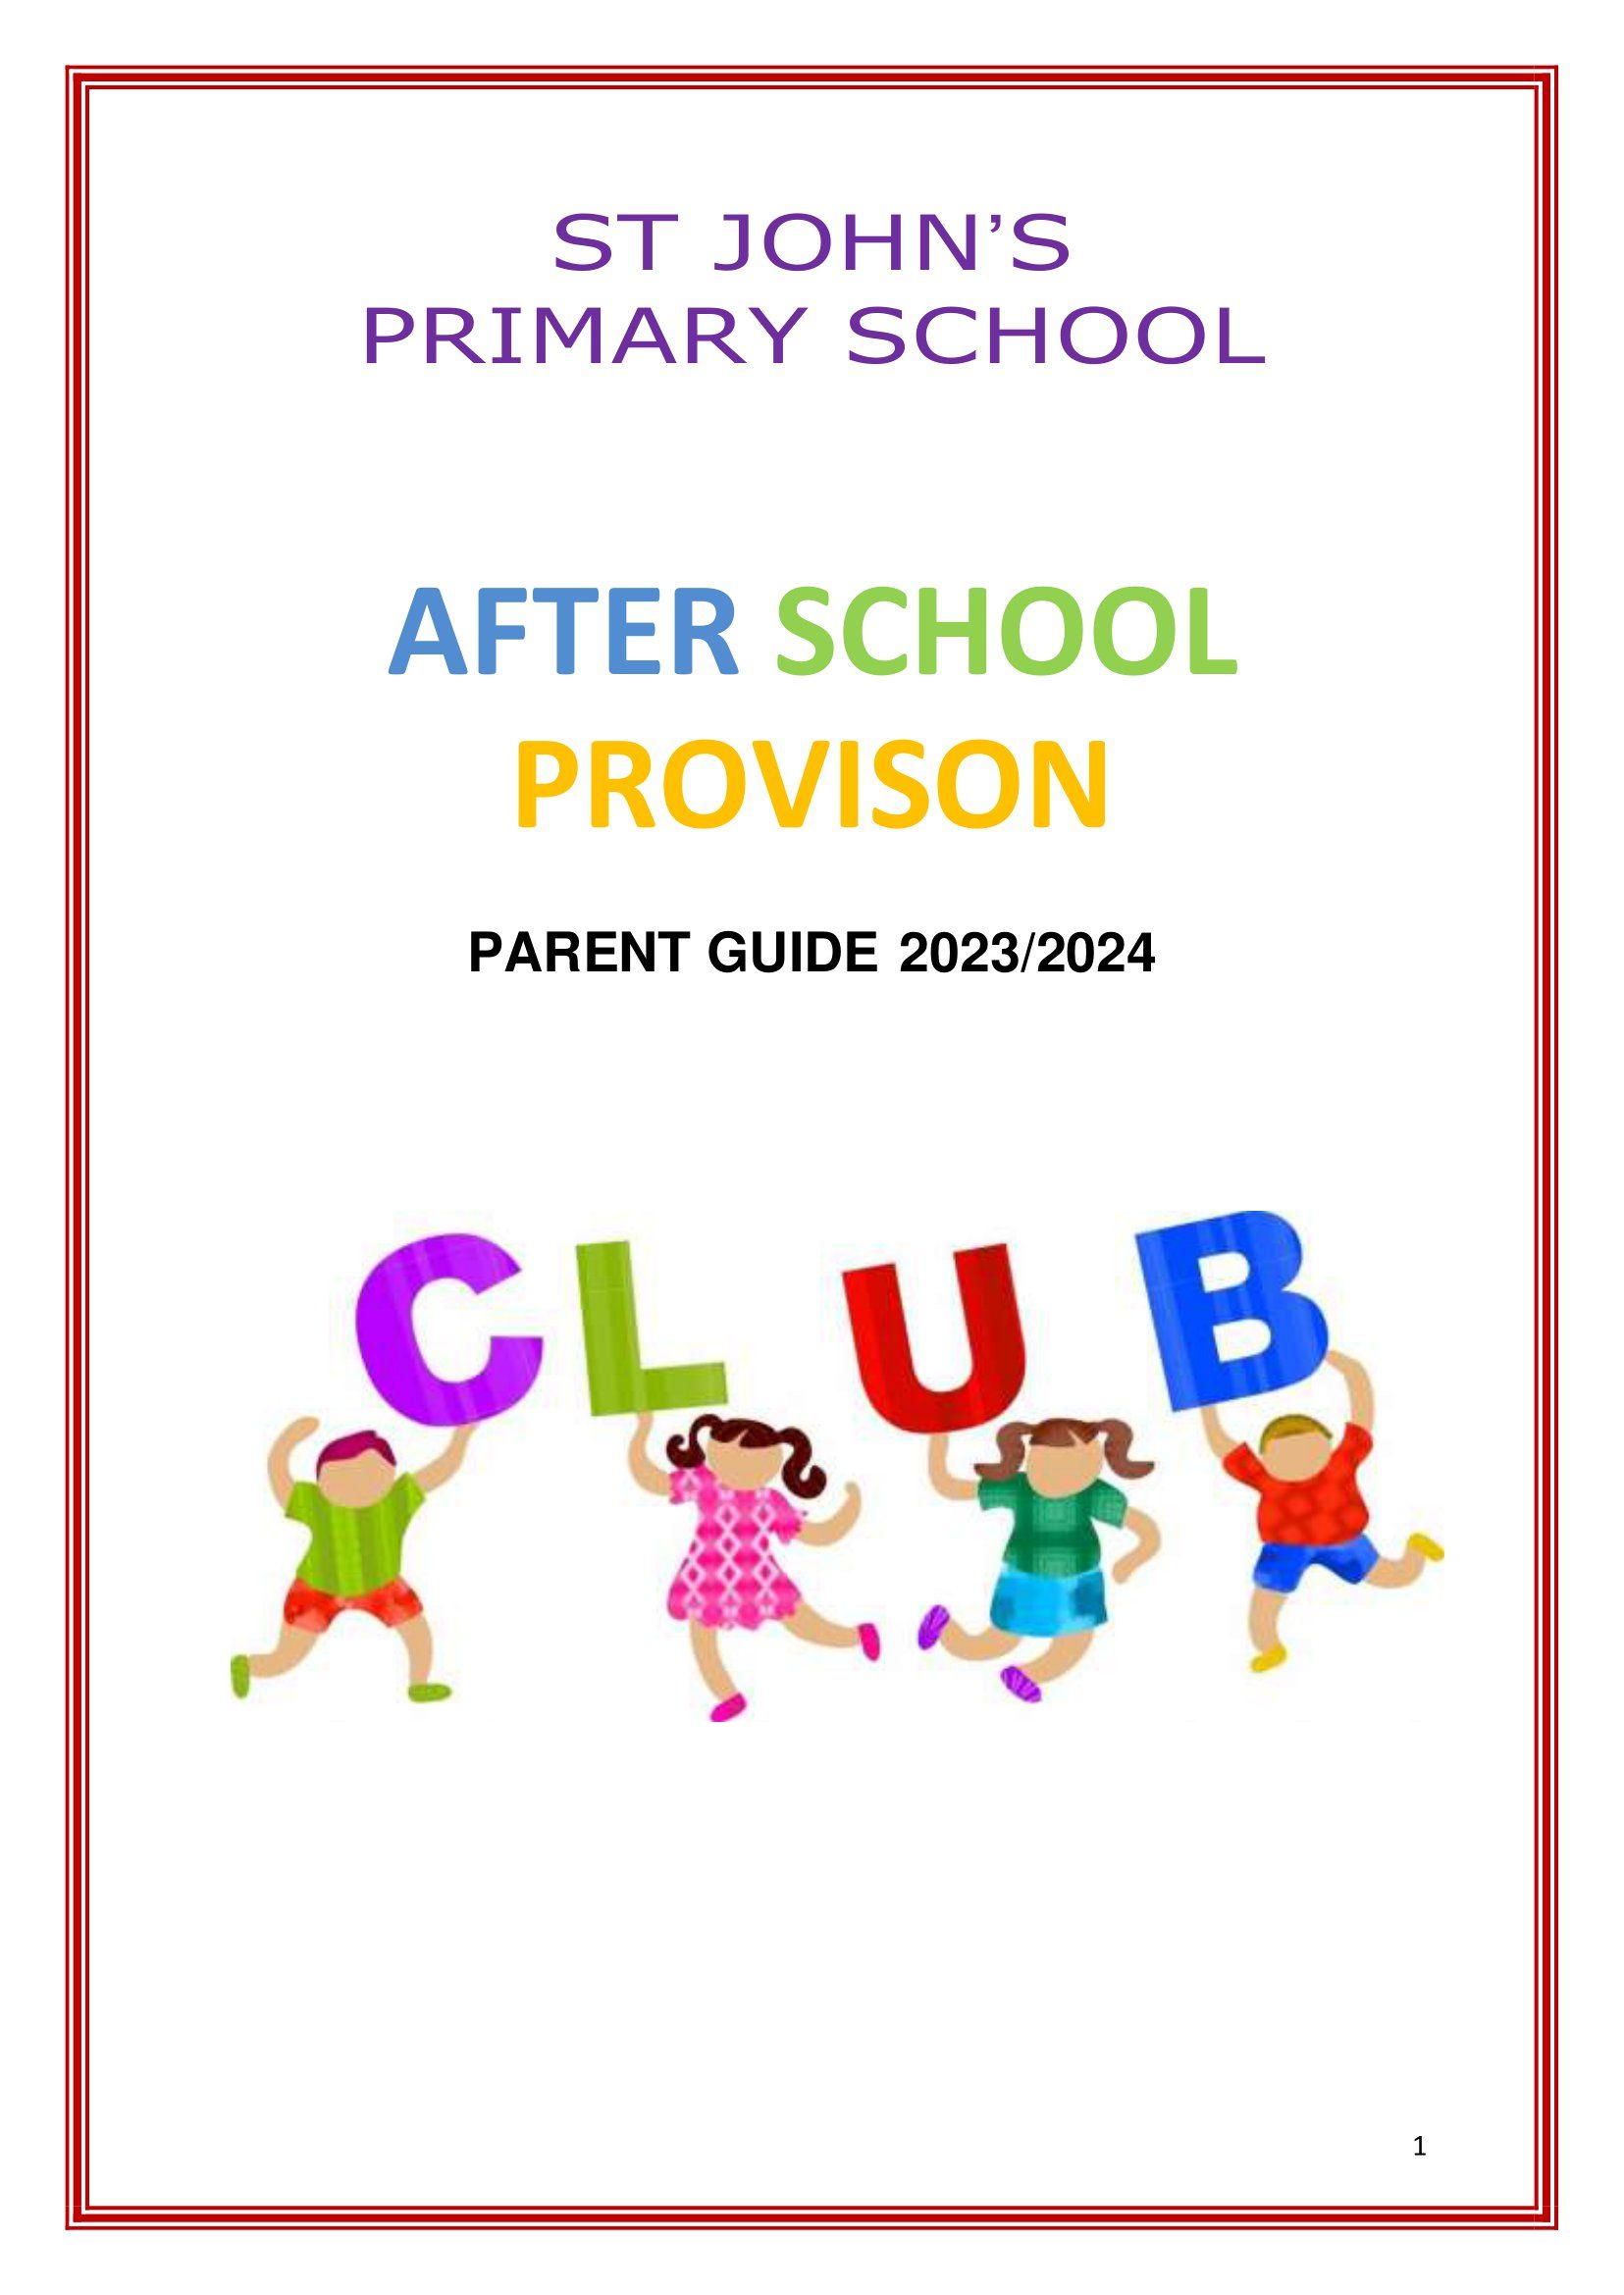 After School Provision - Parent Guide